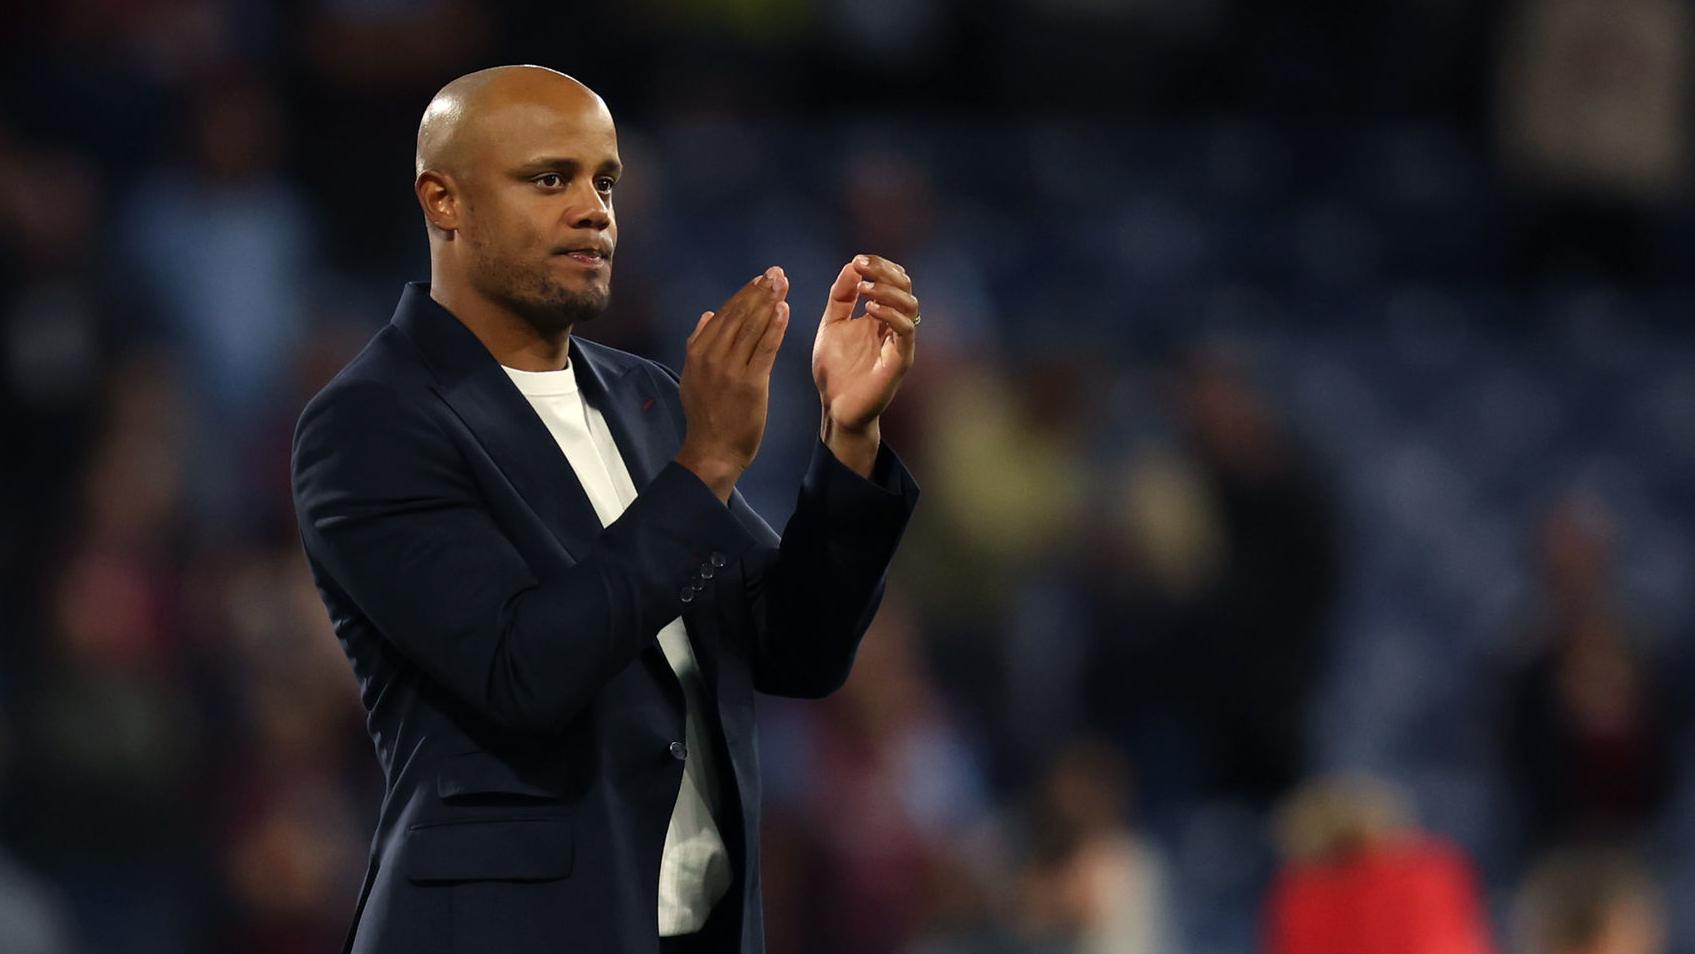 Kompany wedded to style of play but statistics do not bode well for Burnley, Burnley